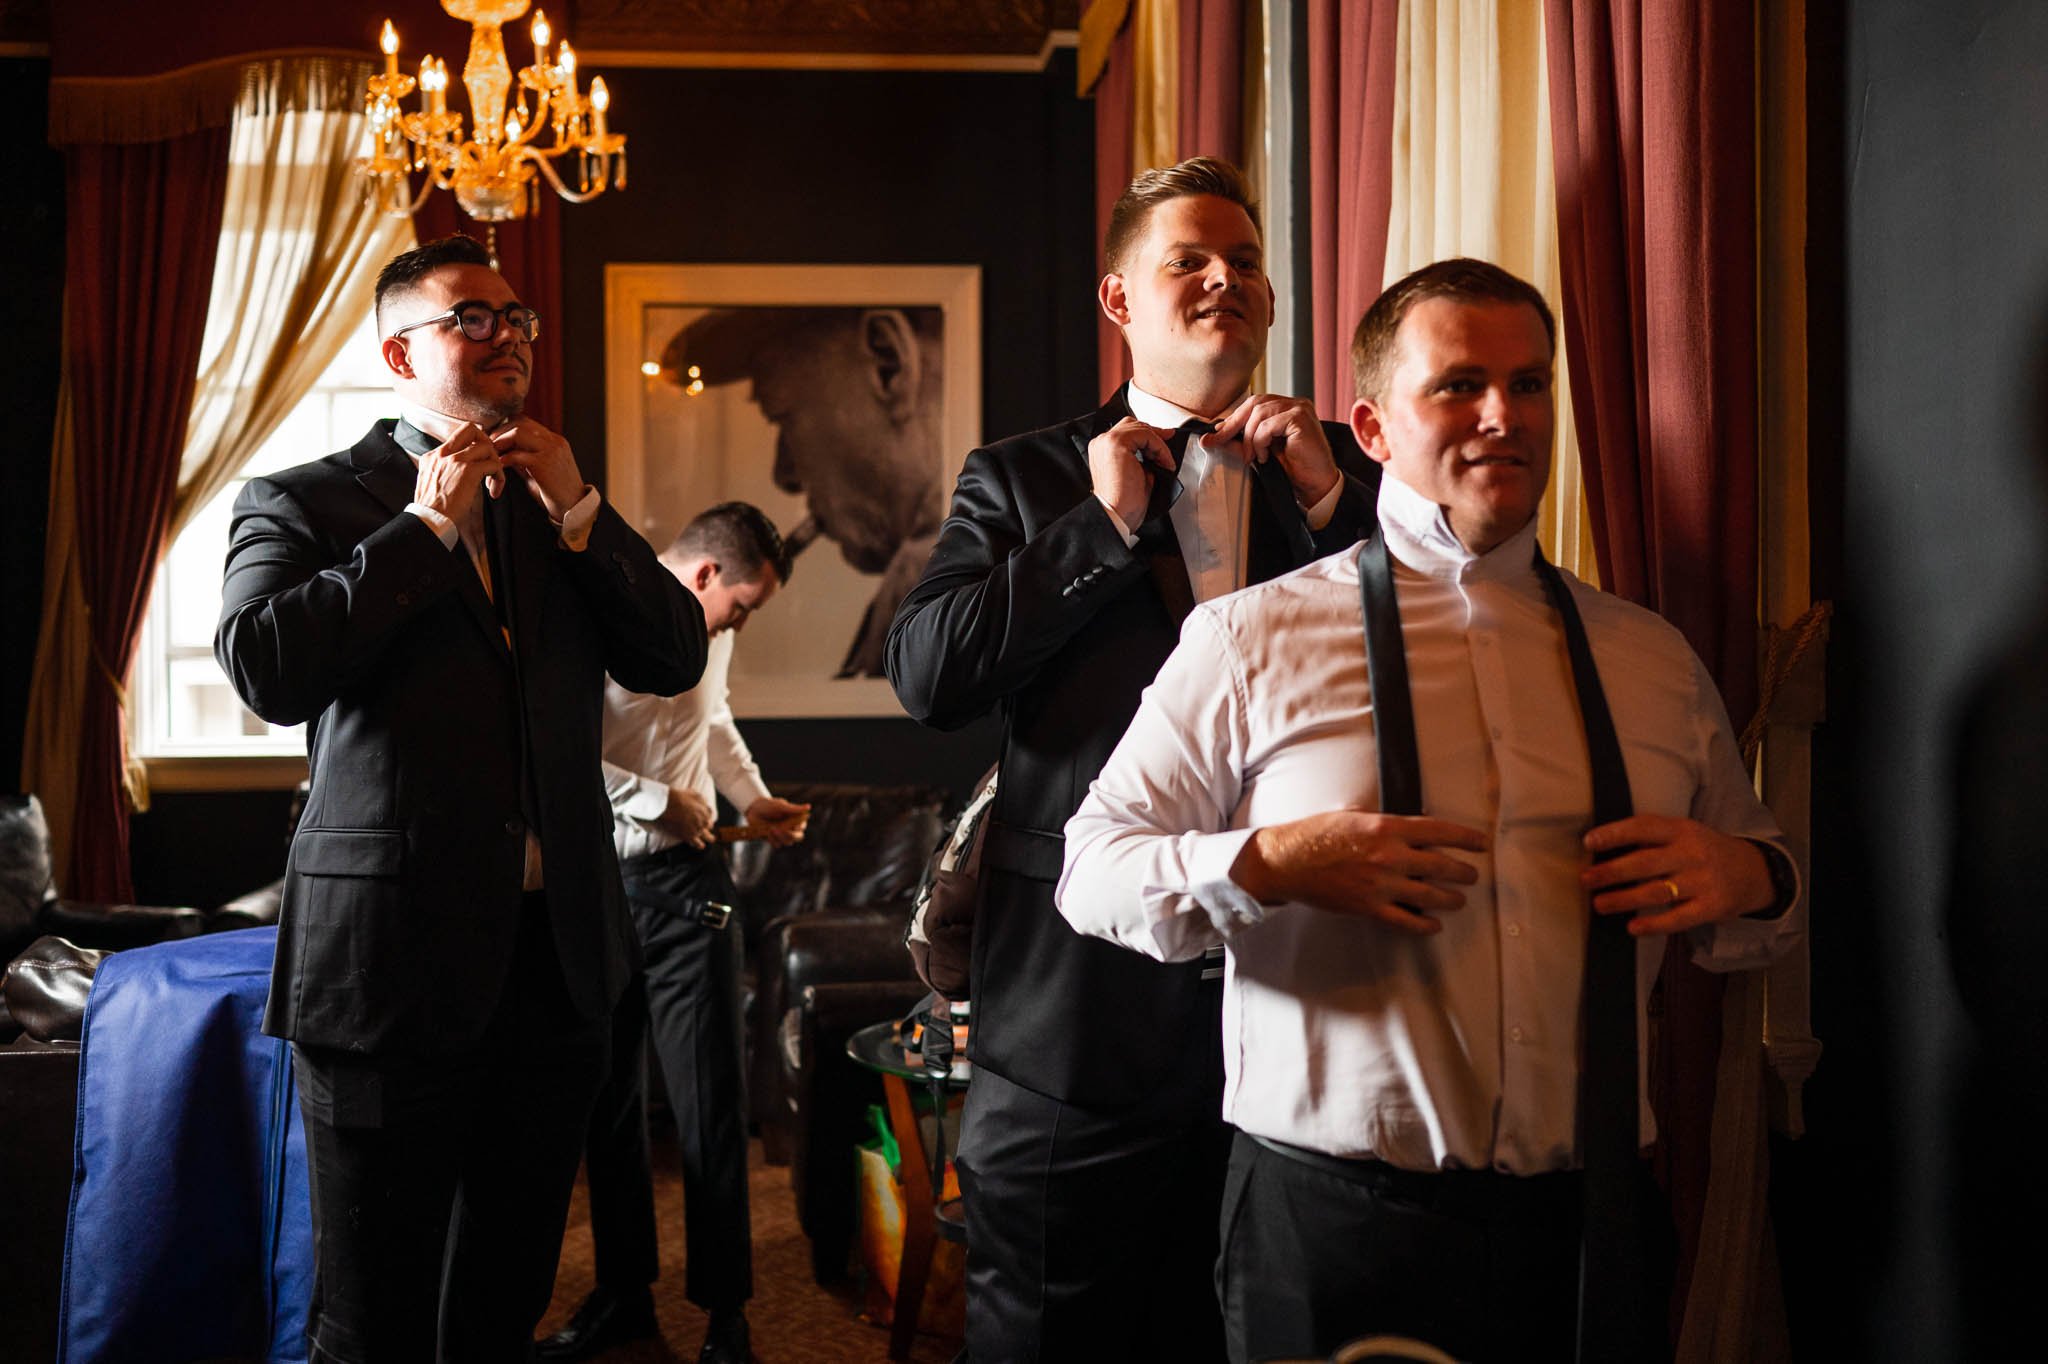 Groomsmen getting ready in the Cigar Lounge at the Halifax Club